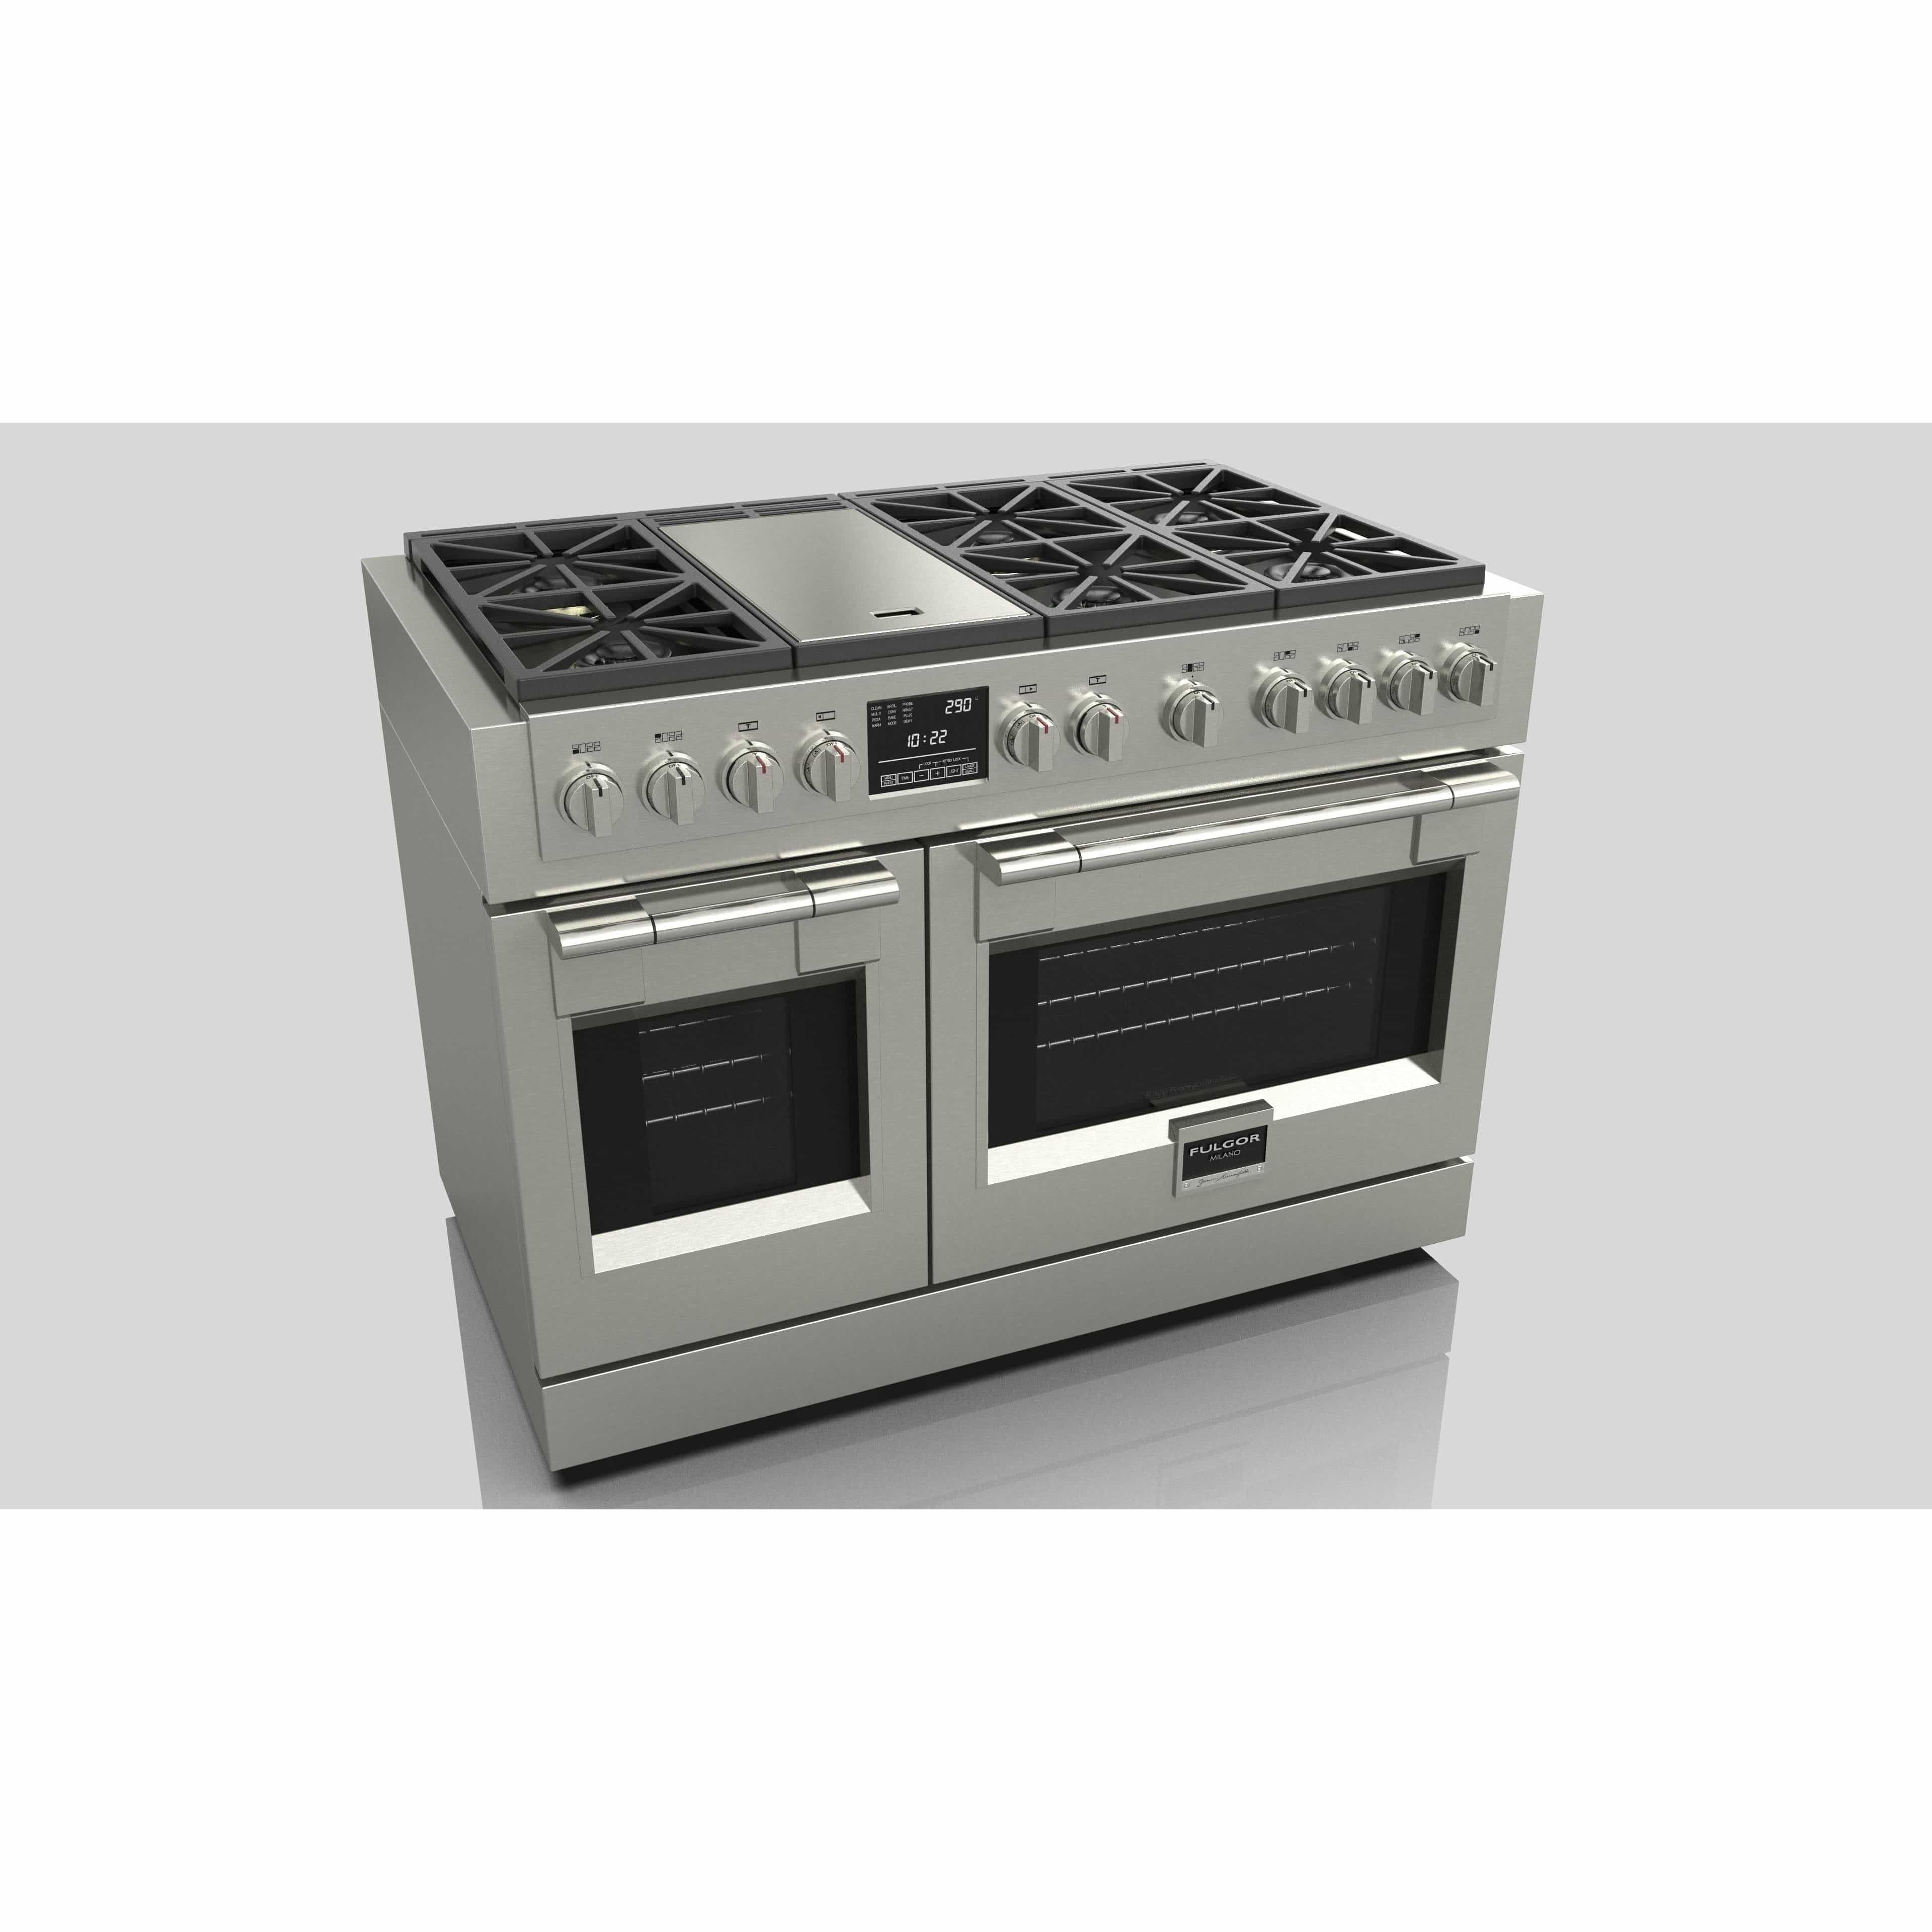 Fulgor Milano 48" Dual Fuel Professional Range with 6 Dual Flame Burners,  6.5 Cu. Ft. Total Capacity Stainless Steel - F6PDF486GS1 Ranges Luxury Appliances Direct